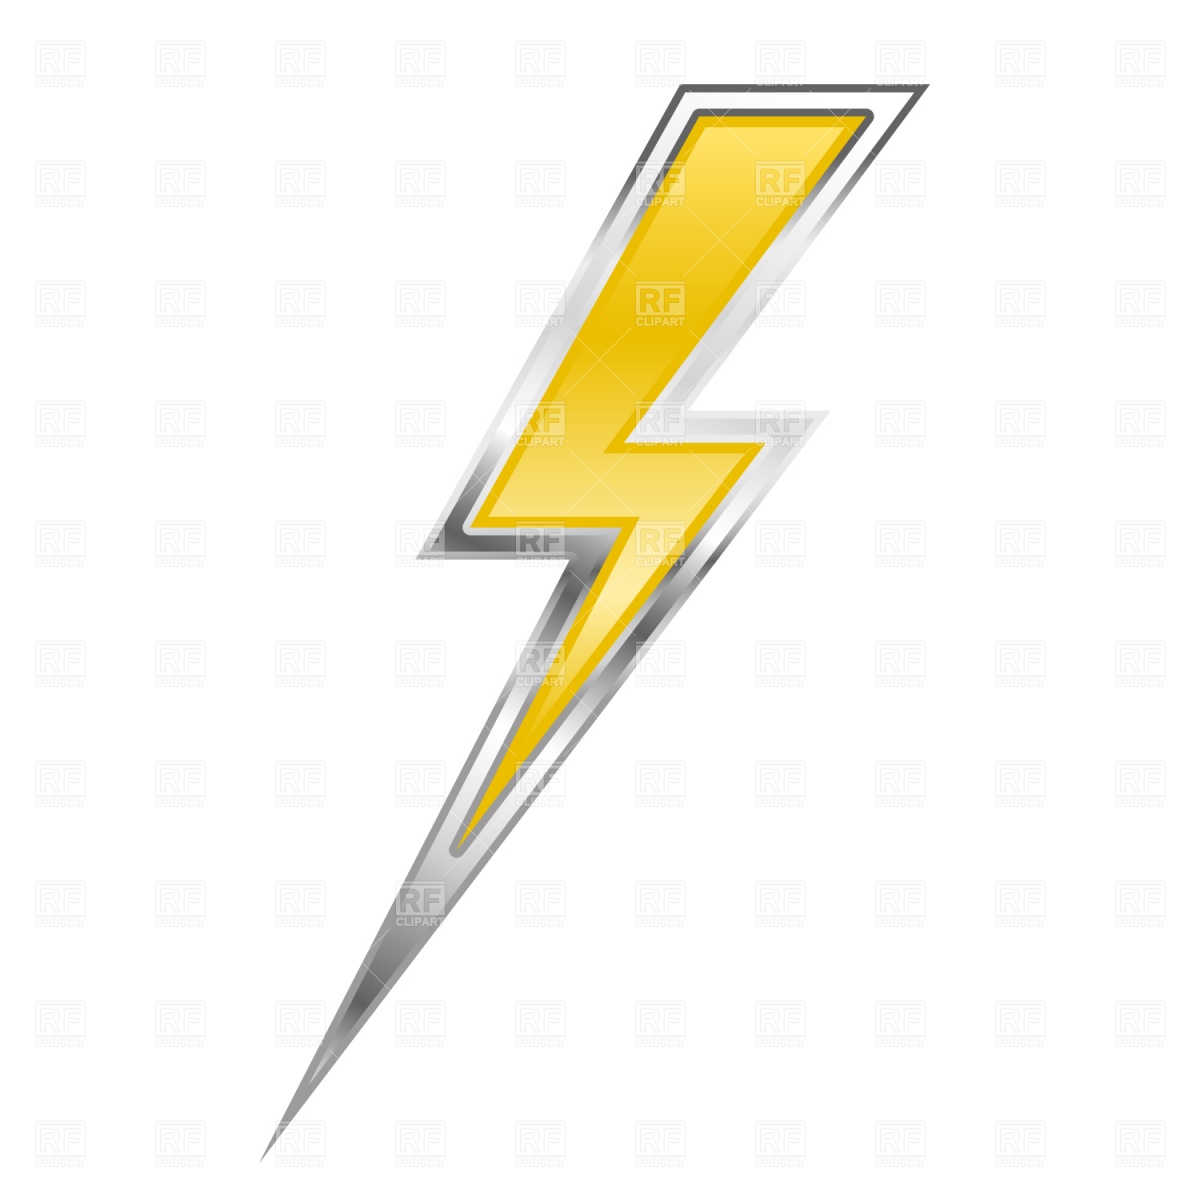 Blue Lightning Bolt Clipart | Clipart library - Free Clipart Images